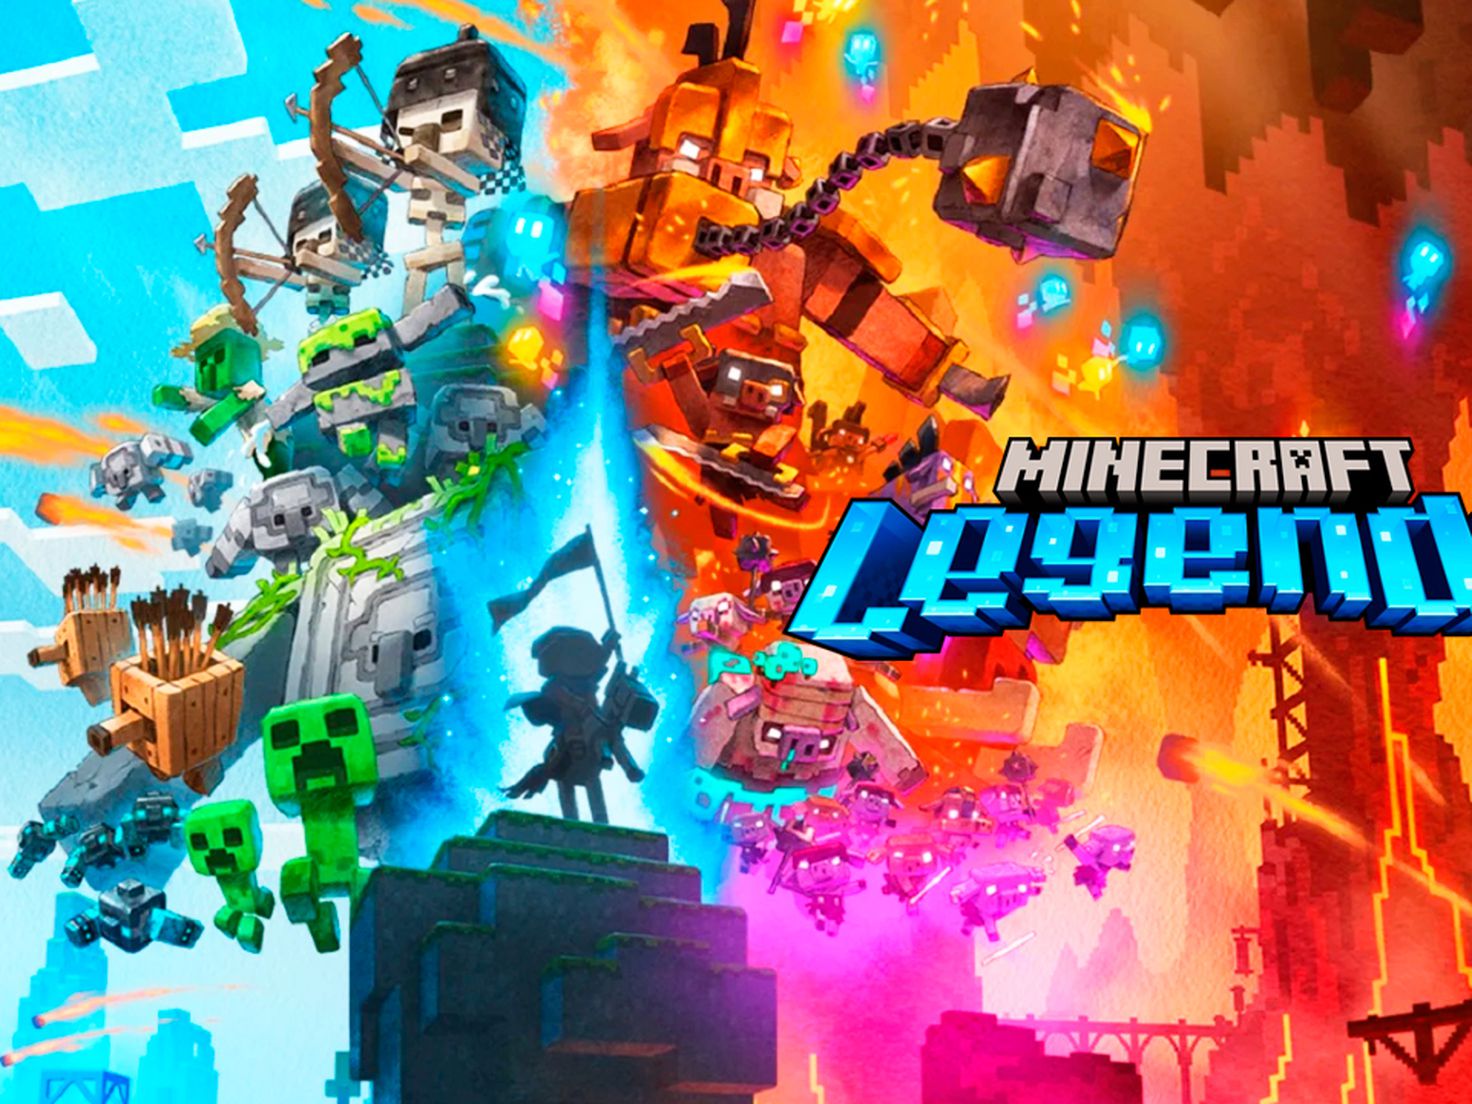 Minecraft Legends: Release Date, Gameplay, Mobs, Platforms, and More